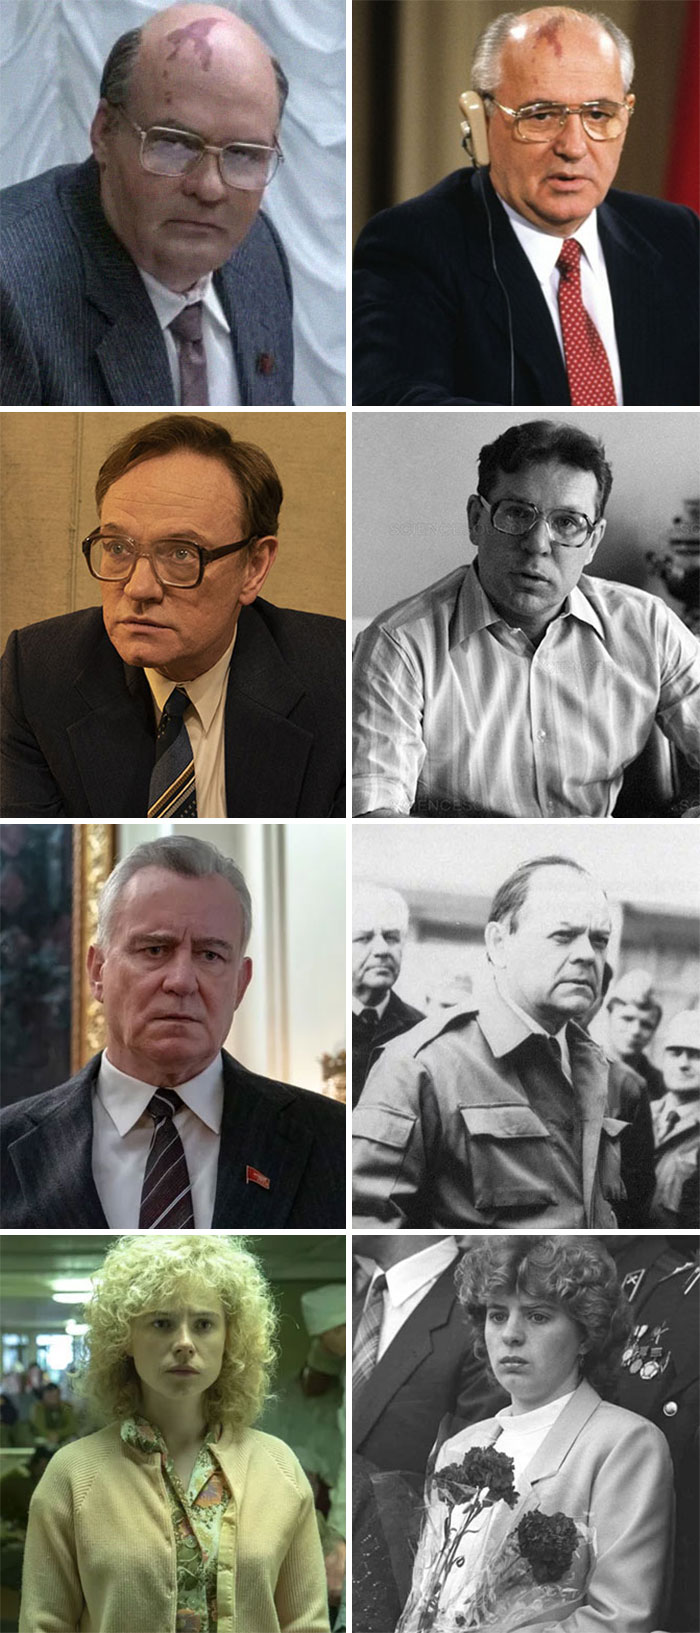 Chernobyl Actors vs. The Real-Life People They Played.